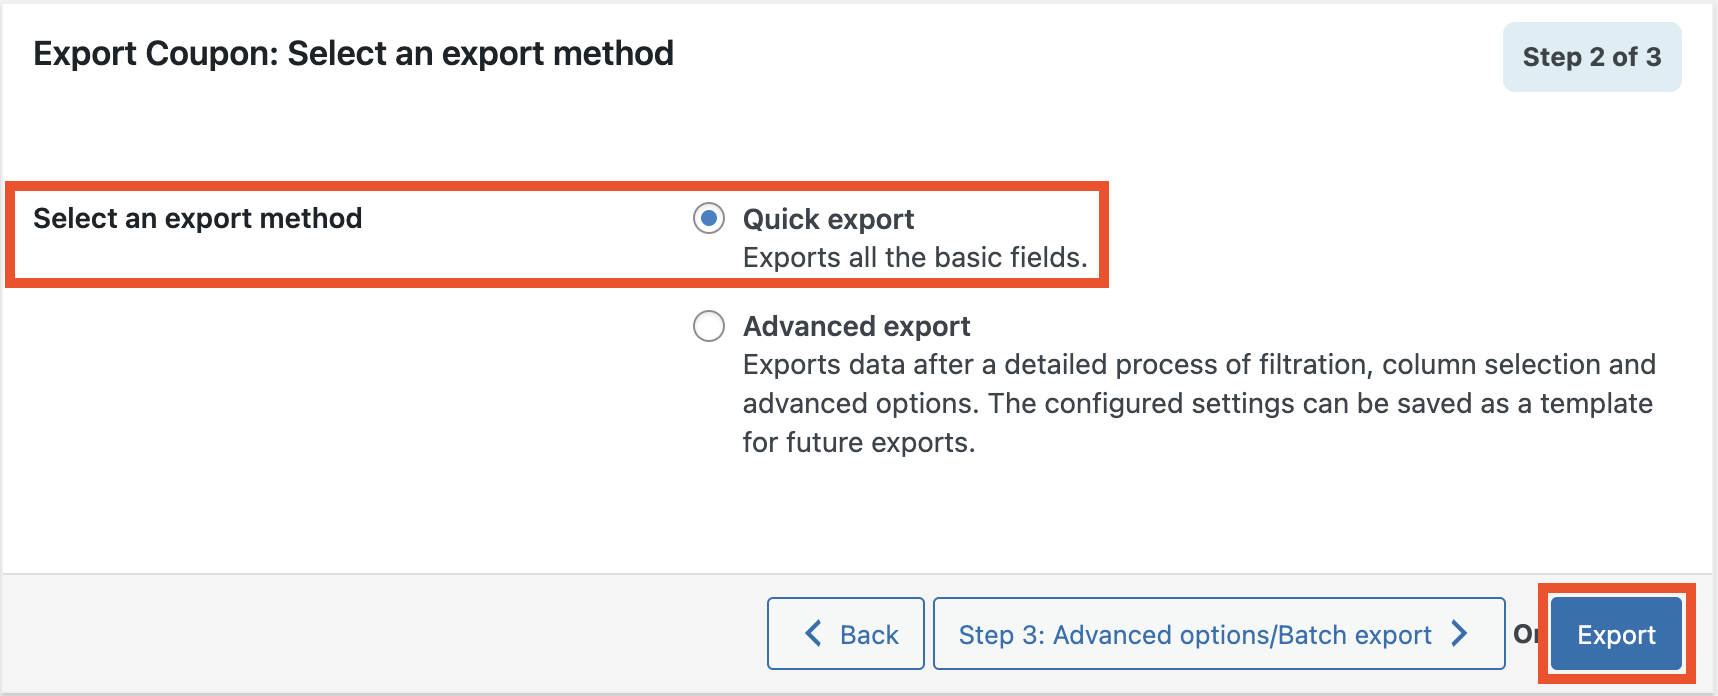 Select quick export option